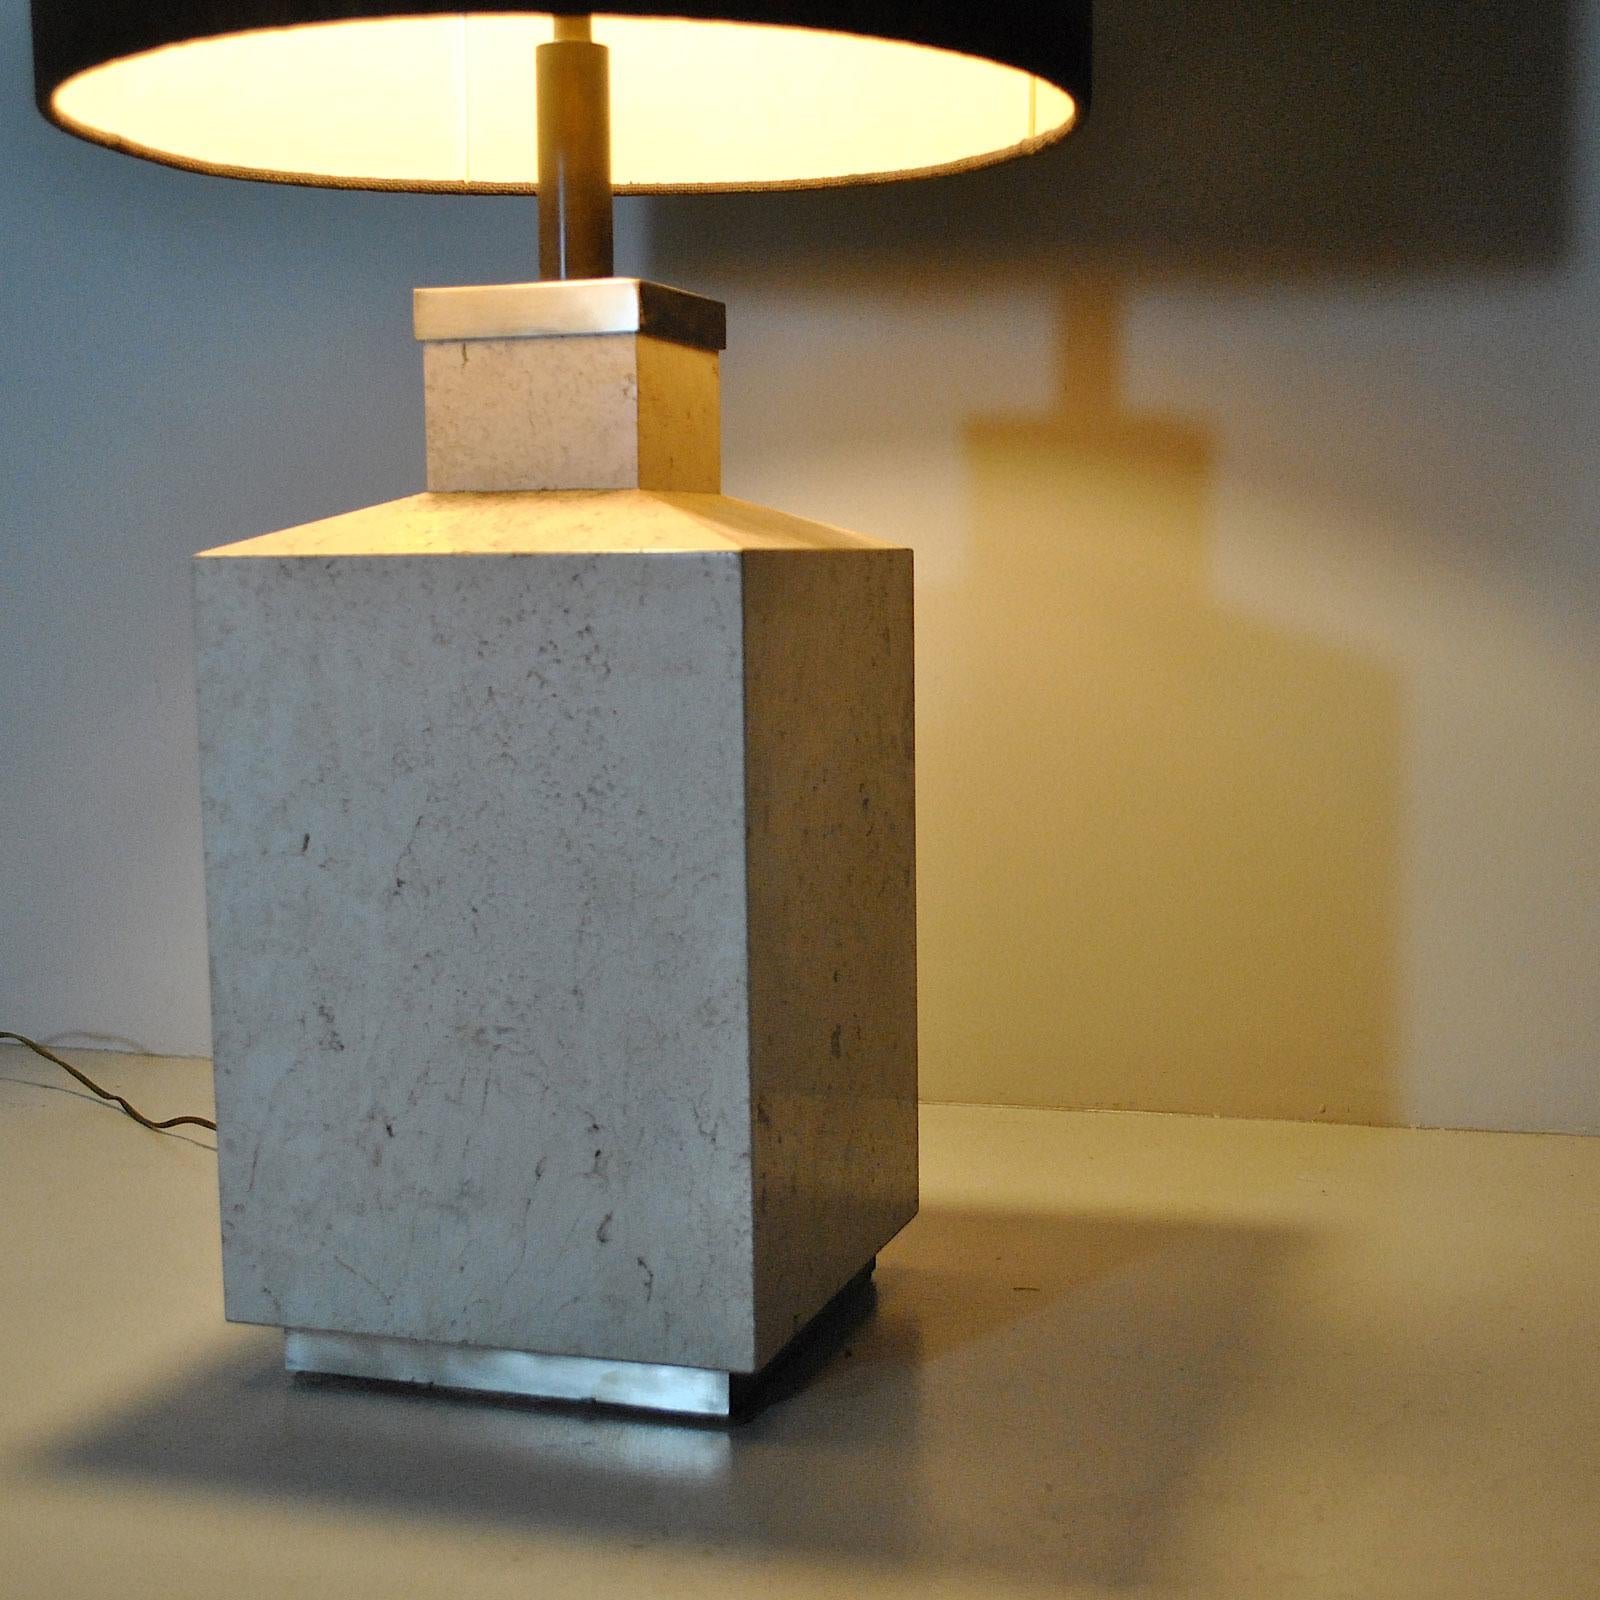 Italian Midcentury Table Lamp Form the 1970s For Sale 7